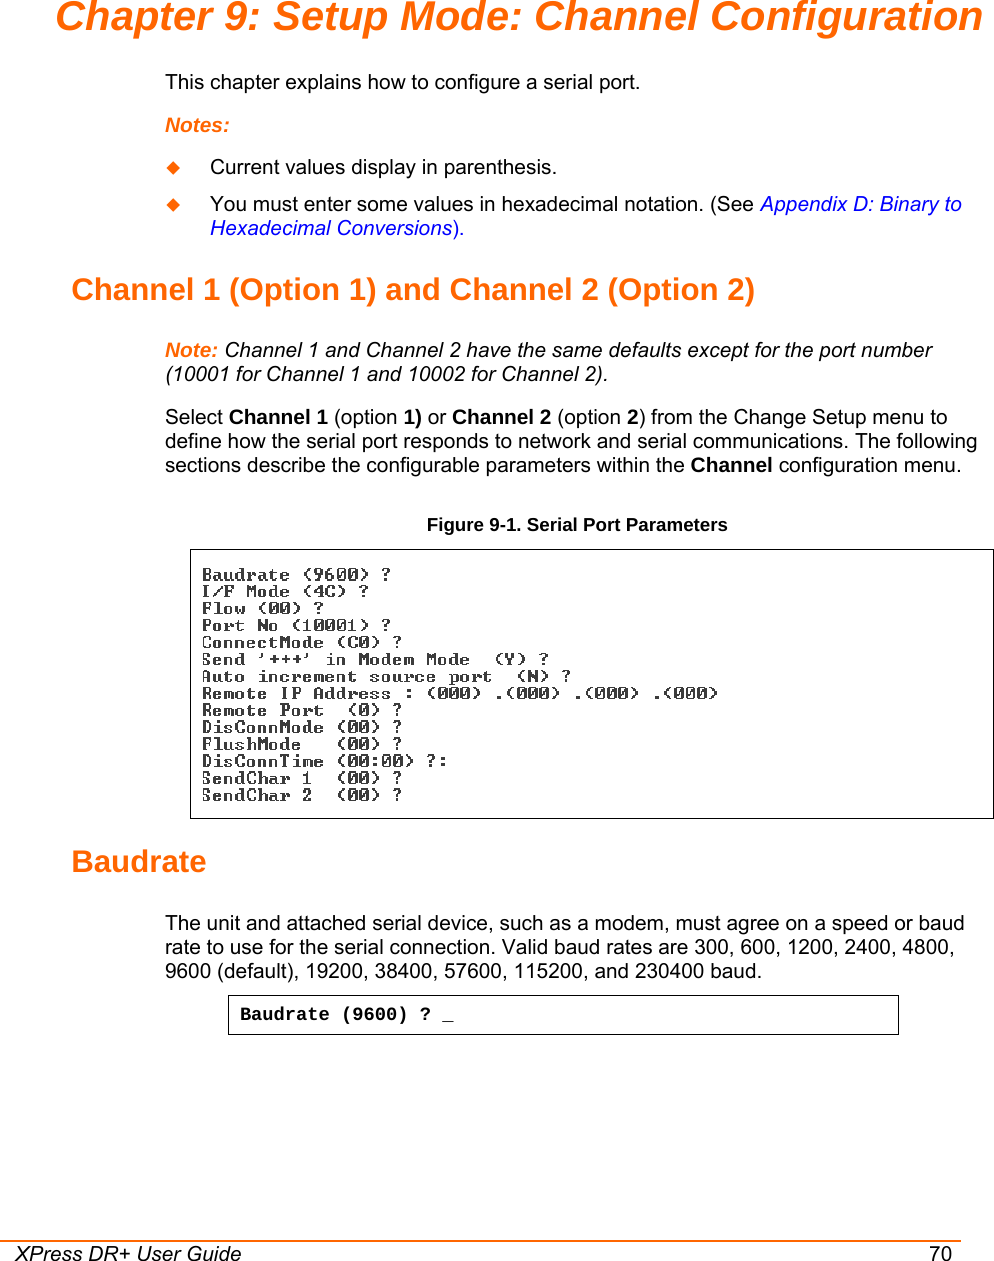  XPress DR+ User Guide 70 Chapter 9: Setup Mode: Channel Configuration This chapter explains how to configure a serial port. Notes:    Current values display in parenthesis.  You must enter some values in hexadecimal notation. (See Appendix D: Binary to Hexadecimal Conversions). Channel 1 (Option 1) and Channel 2 (Option 2) Note: Channel 1 and Channel 2 have the same defaults except for the port number (10001 for Channel 1 and 10002 for Channel 2). Select Channel 1 (option 1) or Channel 2 (option 2) from the Change Setup menu to define how the serial port responds to network and serial communications. The following sections describe the configurable parameters within the Channel configuration menu.  Figure 9-1. Serial Port Parameters   Baudrate  The unit and attached serial device, such as a modem, must agree on a speed or baud rate to use for the serial connection. Valid baud rates are 300, 600, 1200, 2400, 4800, 9600 (default), 19200, 38400, 57600, 115200, and 230400 baud.  Baudrate (9600) ? _ 